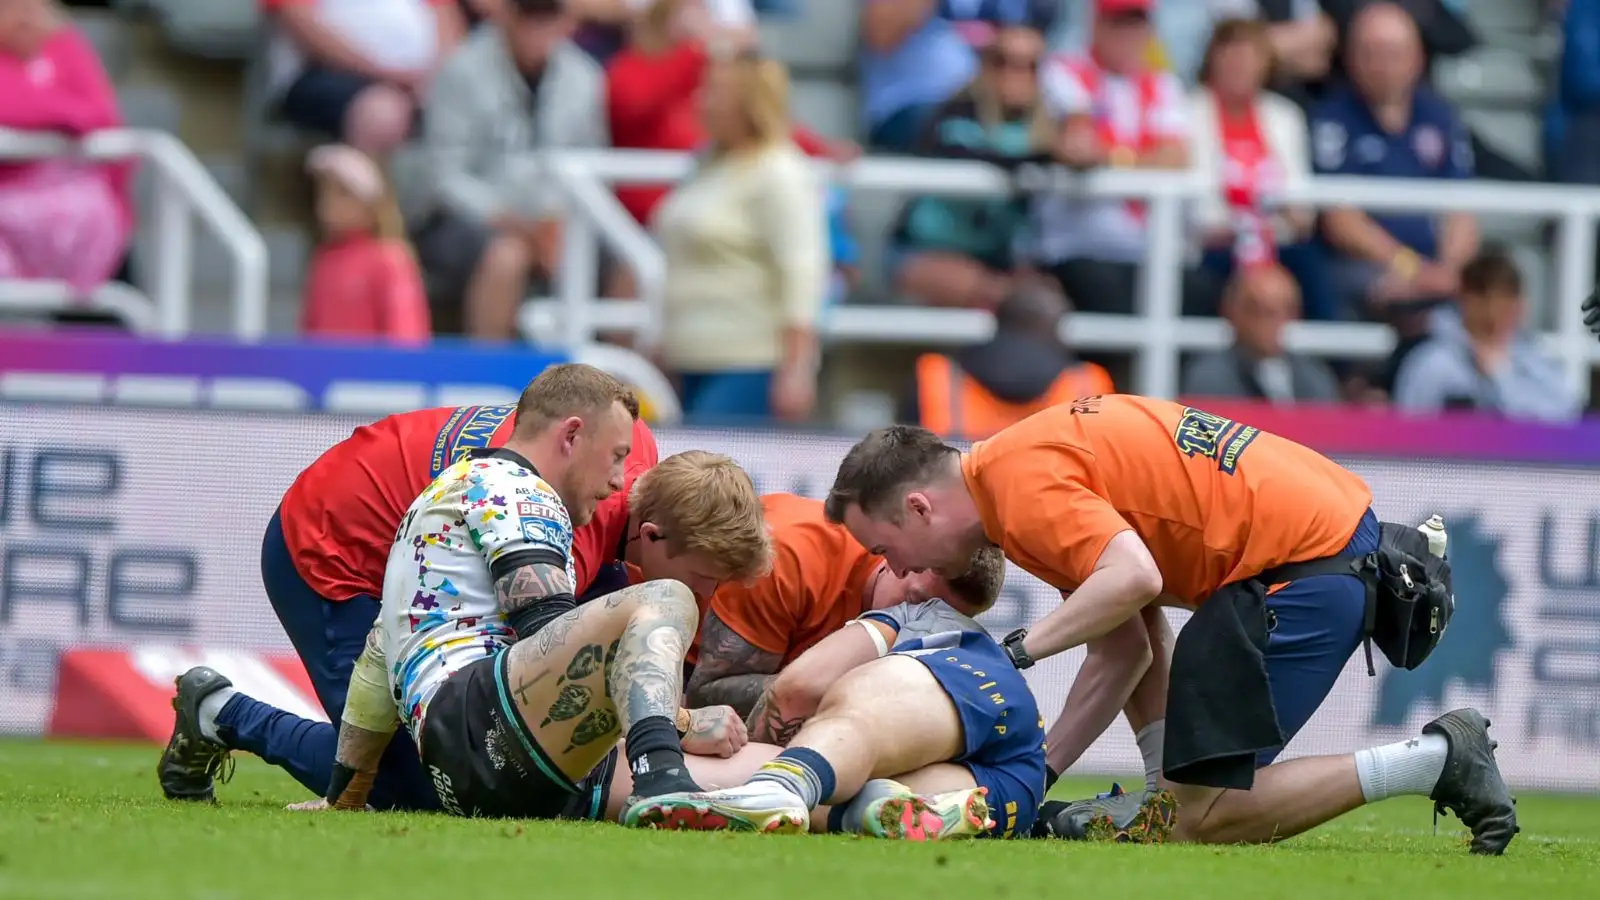 Worrying sight as second player stretchered from St James’ Park during Magic Weekend